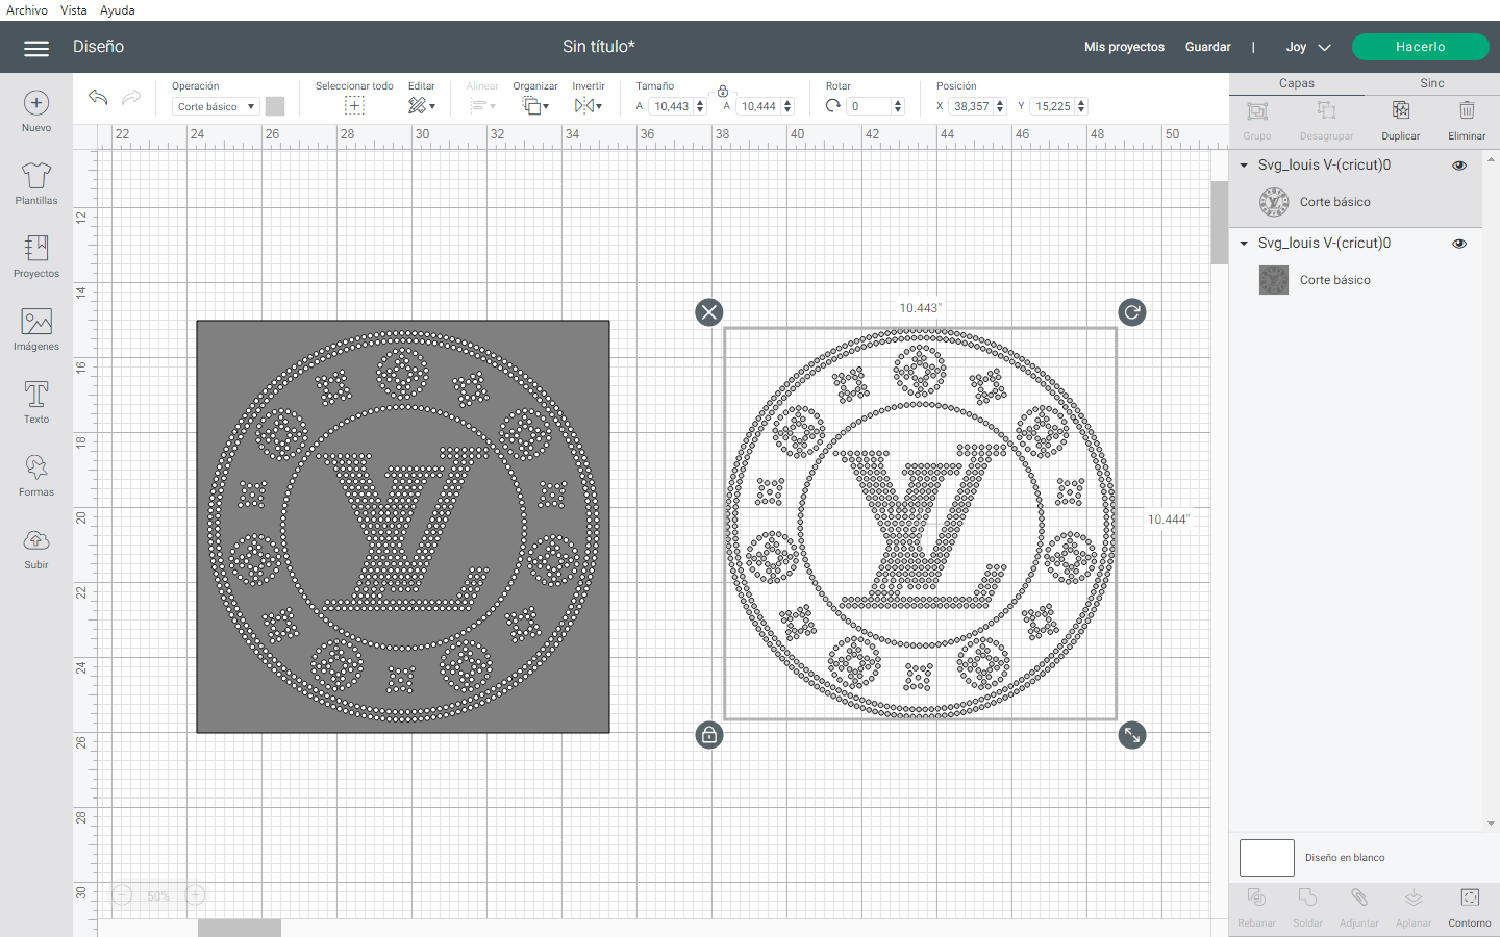 lllᐅ Louis Vuitton LV Scattered Rhinestone SVG - bling template file